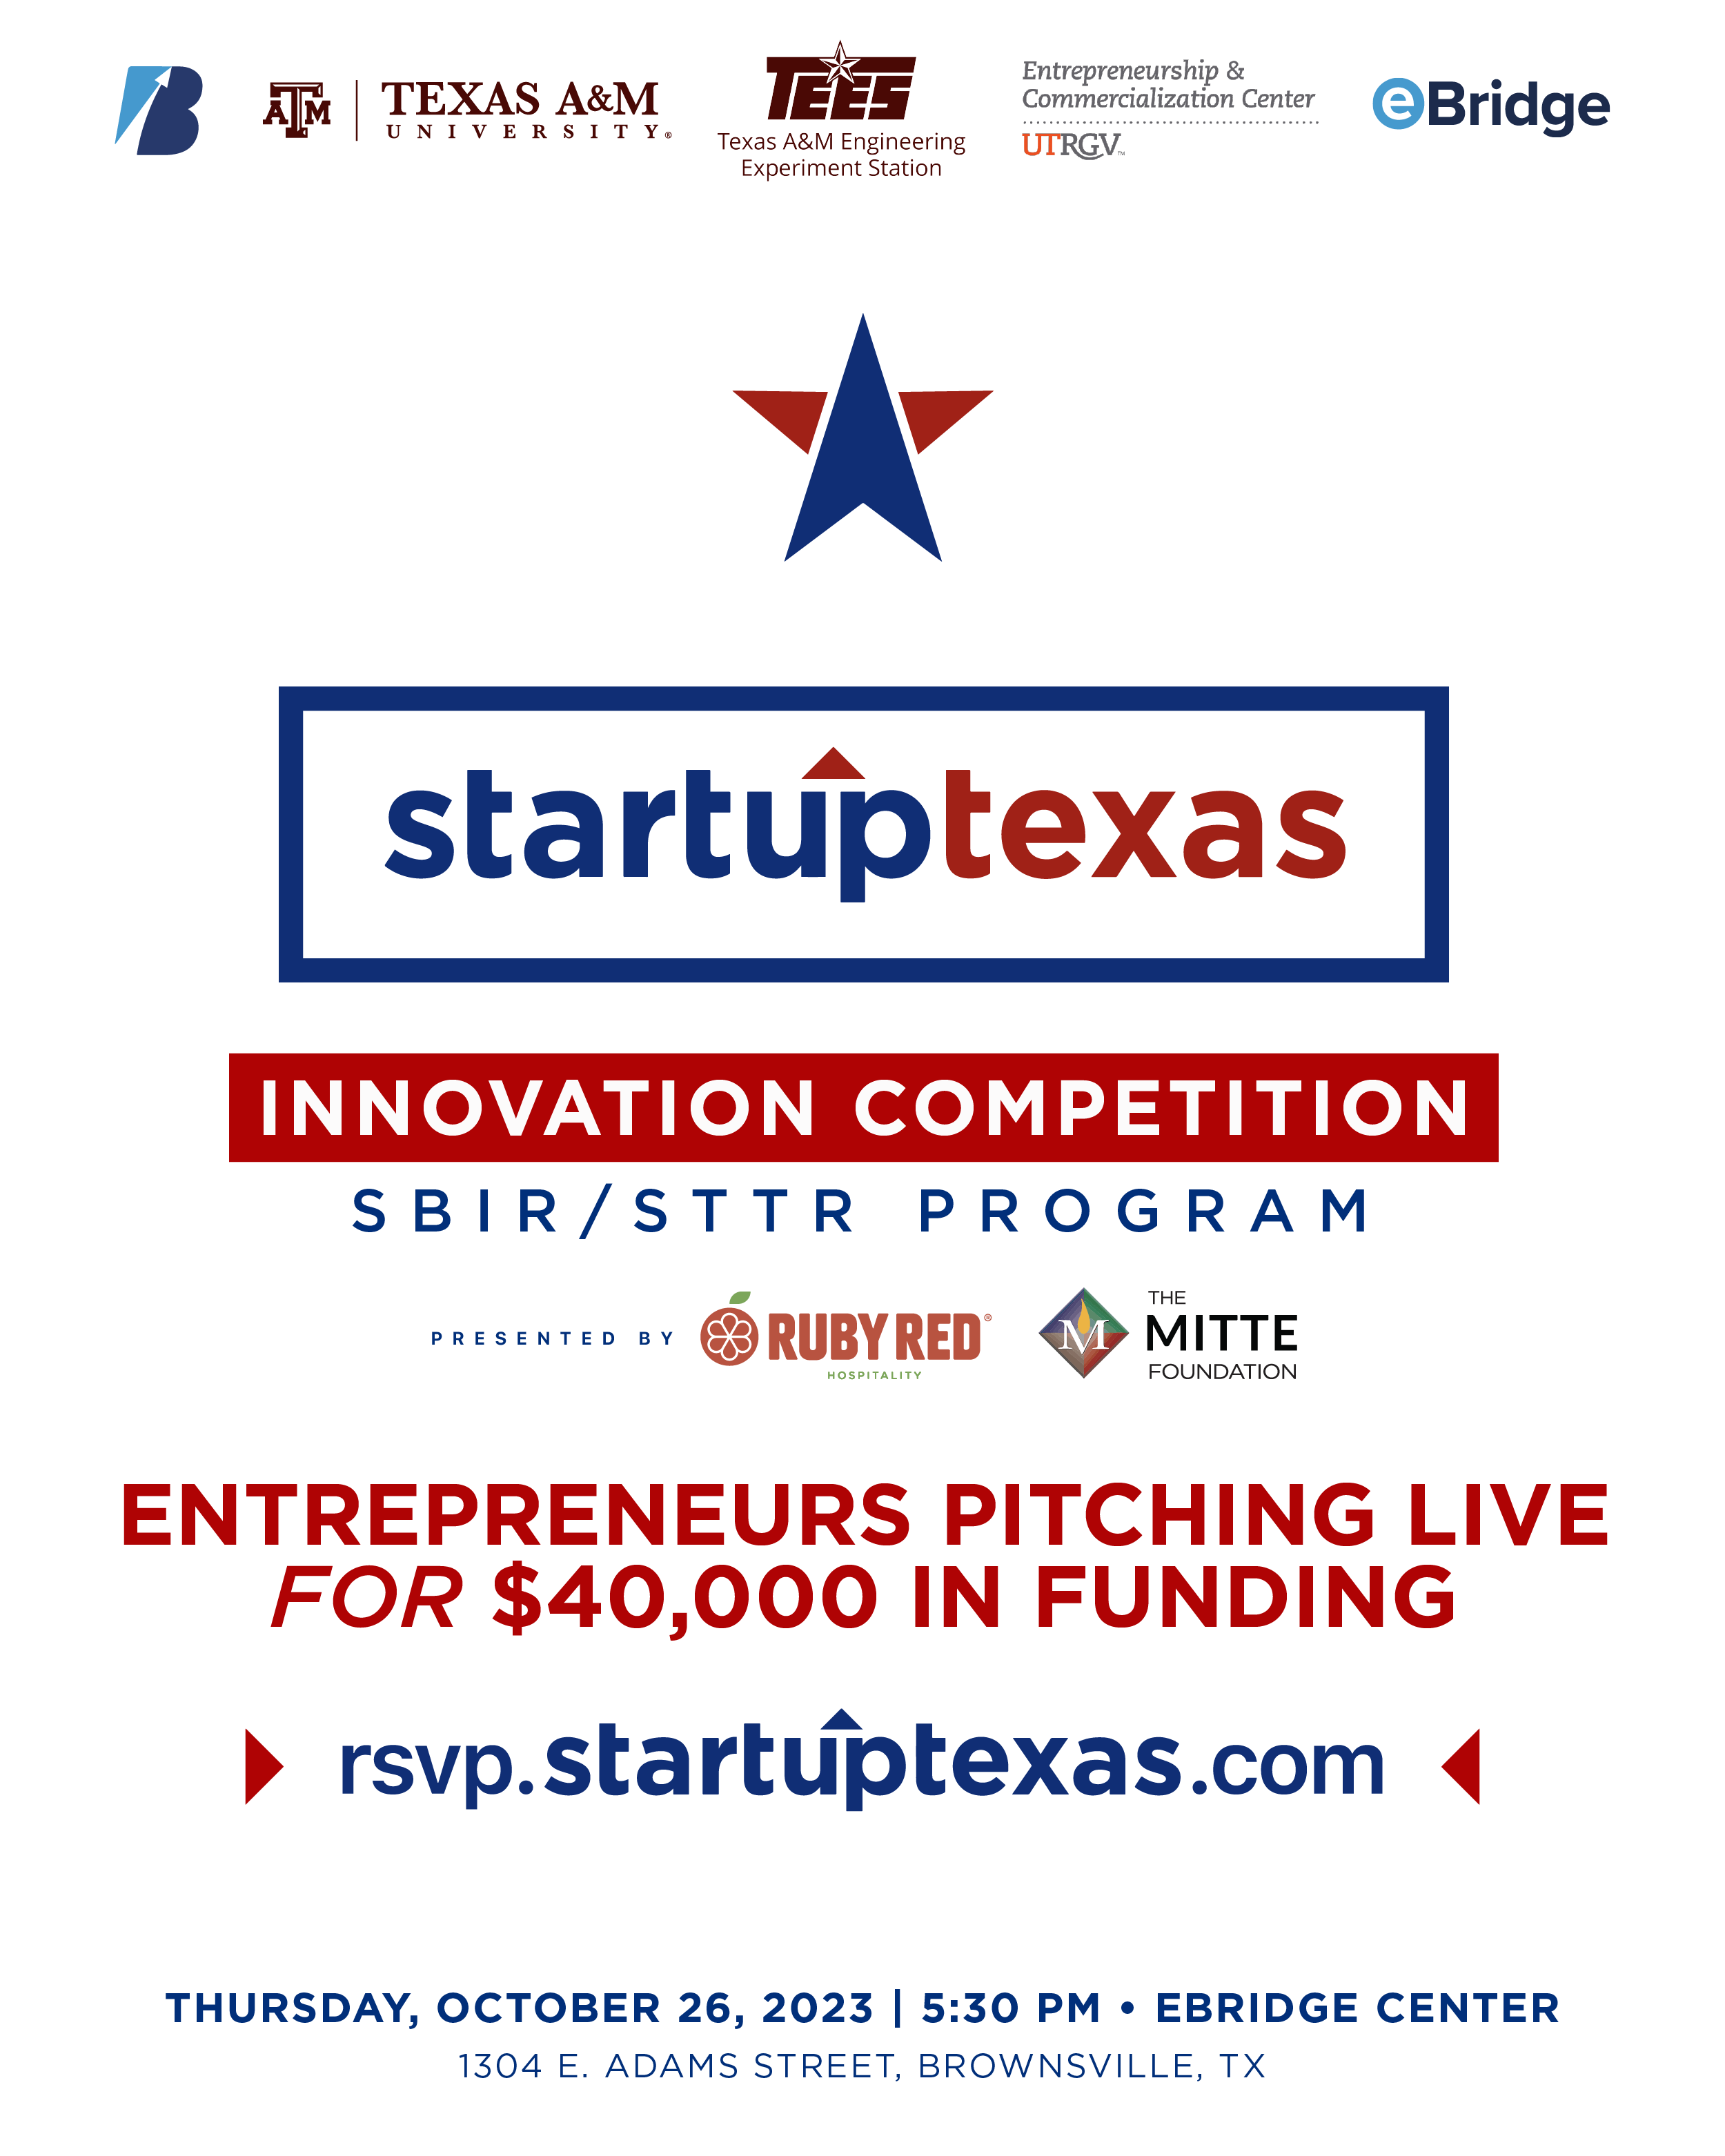 Texas A&M provides $70,000 for Upcoming StartUp Texas Innovation Competition, in Partnership with BCIC and UTRGV ECC